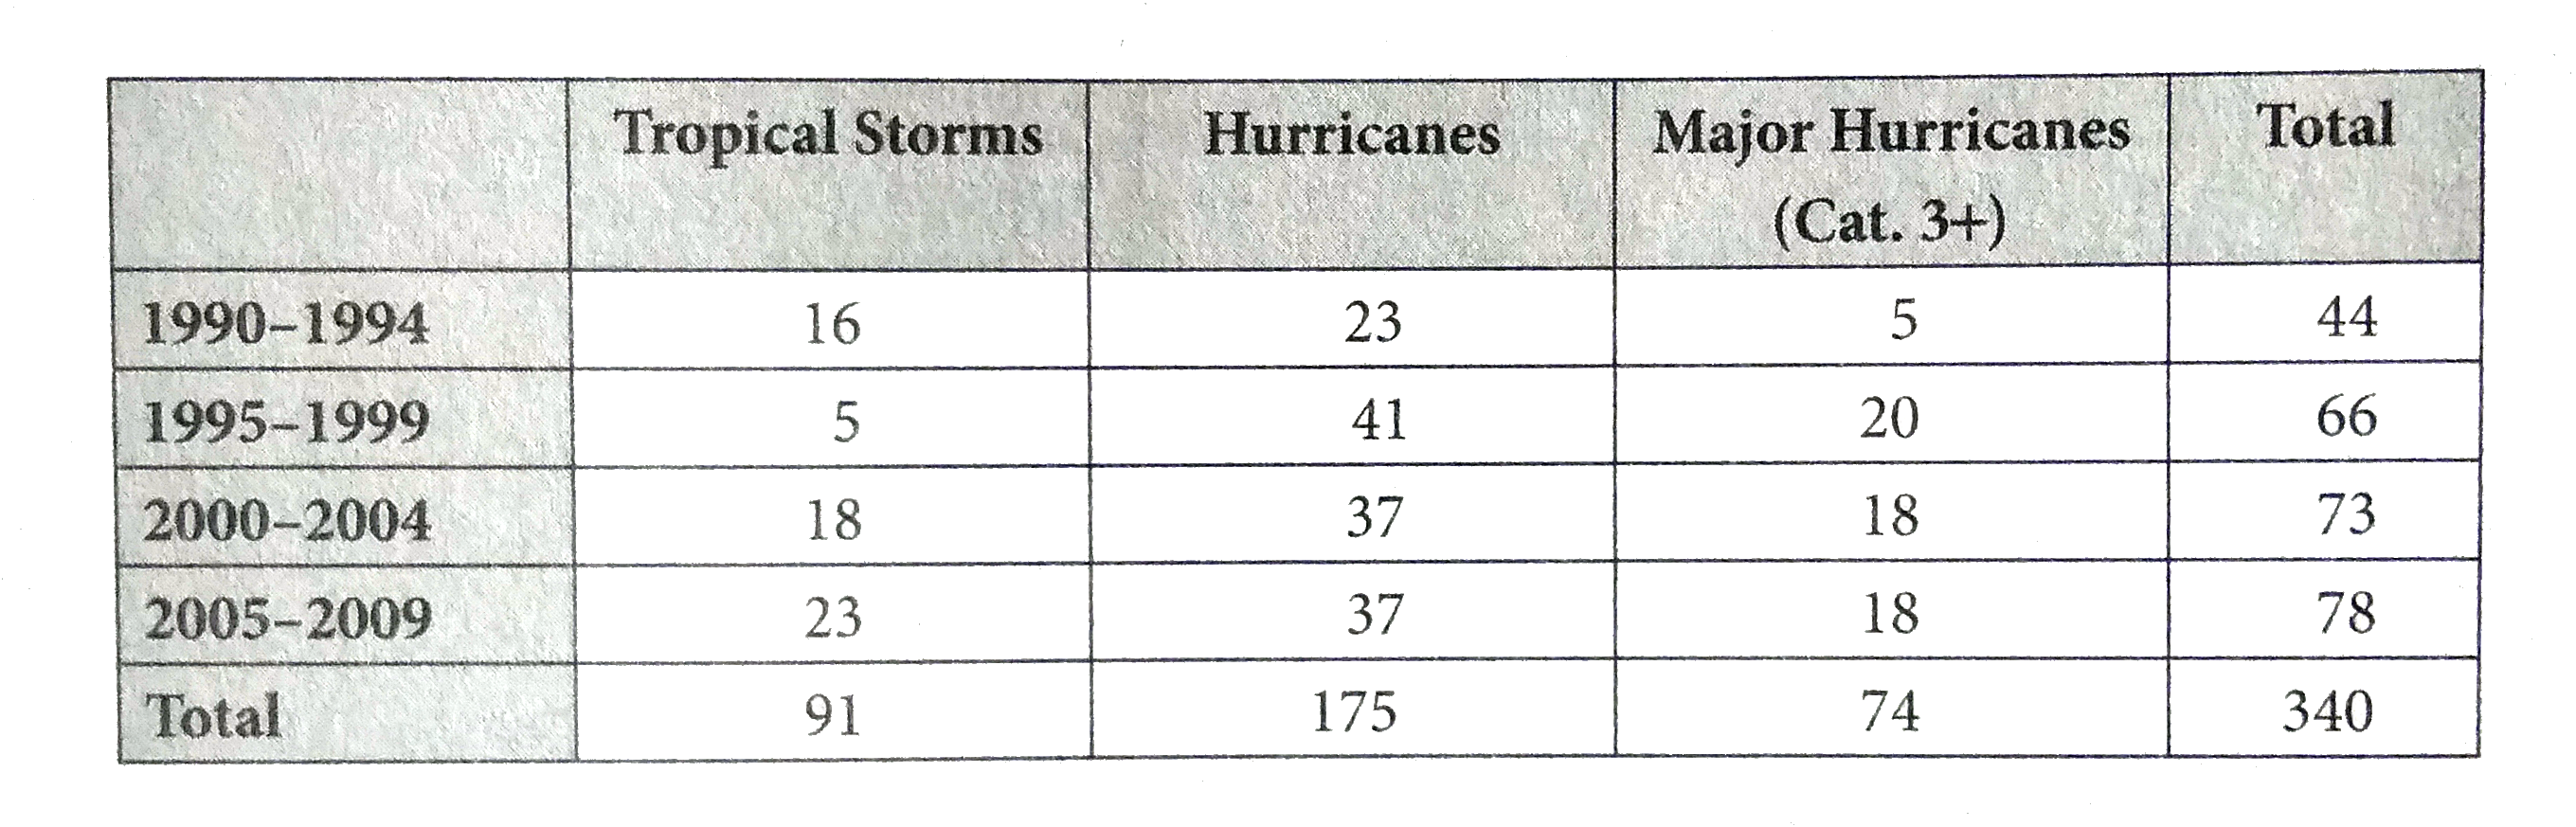 The students in an environmental science class will be randomly assingned a storm to research, with  no two students researching the same storm. Given that the students will each be assigned a hurricane or a major hurricane for their raports,what is the probability that students will be assigned a storm that occurred prior to 2000?